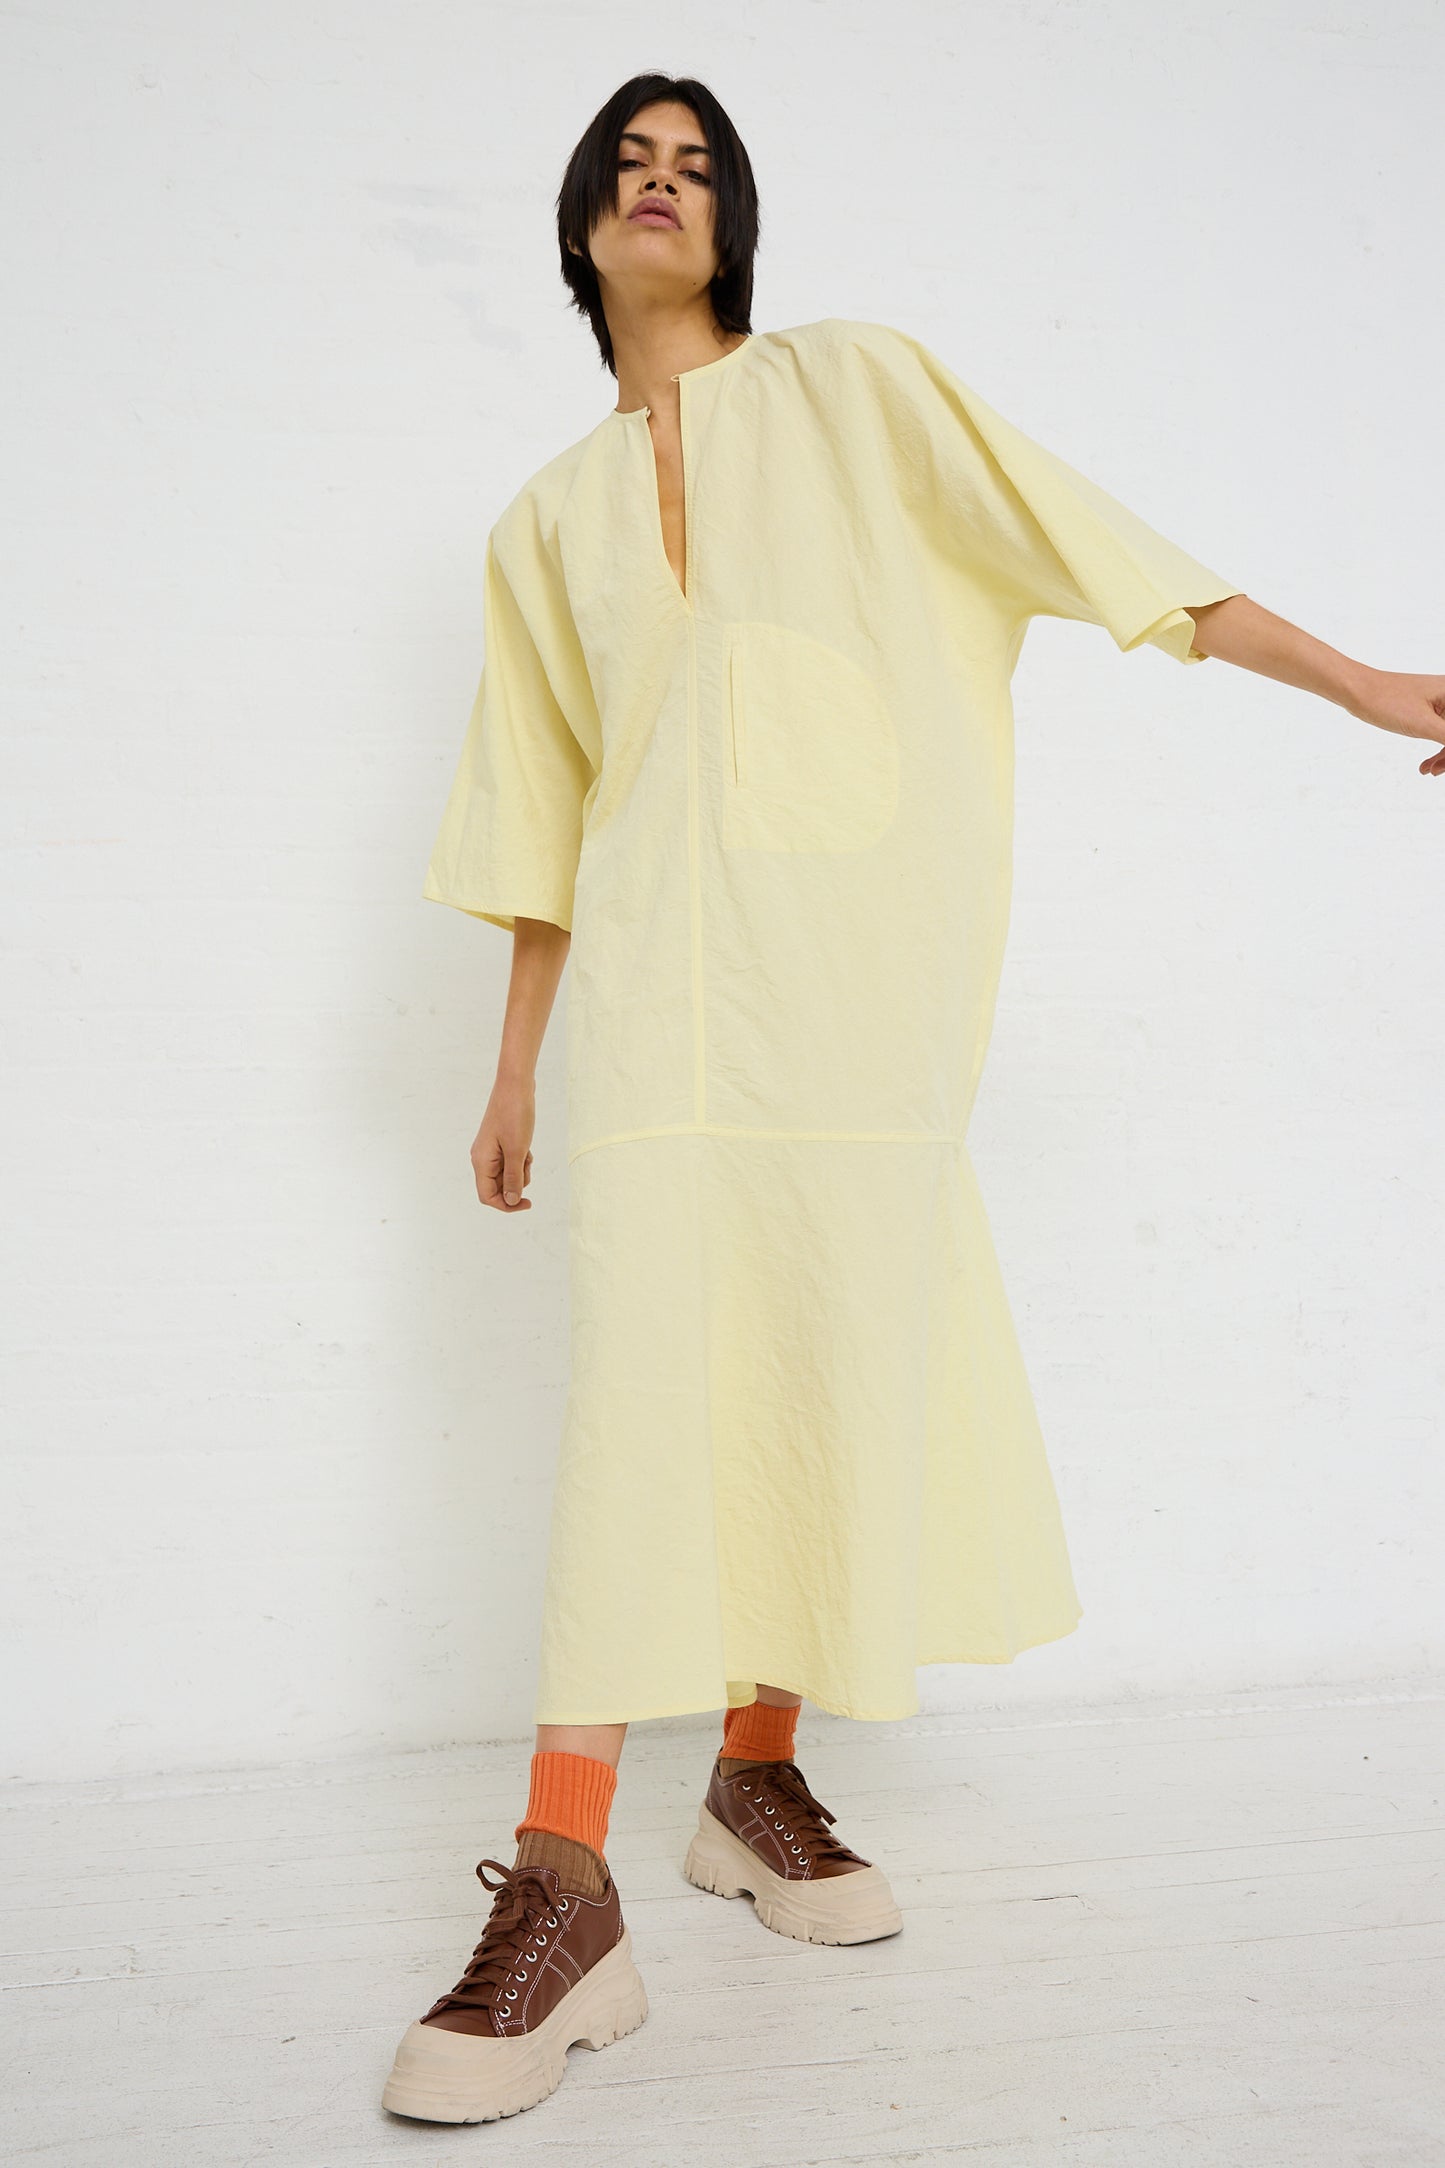 A person in a yellow oversized Linen Cotton Delfi Dress in Pastis made from Sofie D'Hoore, with pockets, posing in a white studio space.